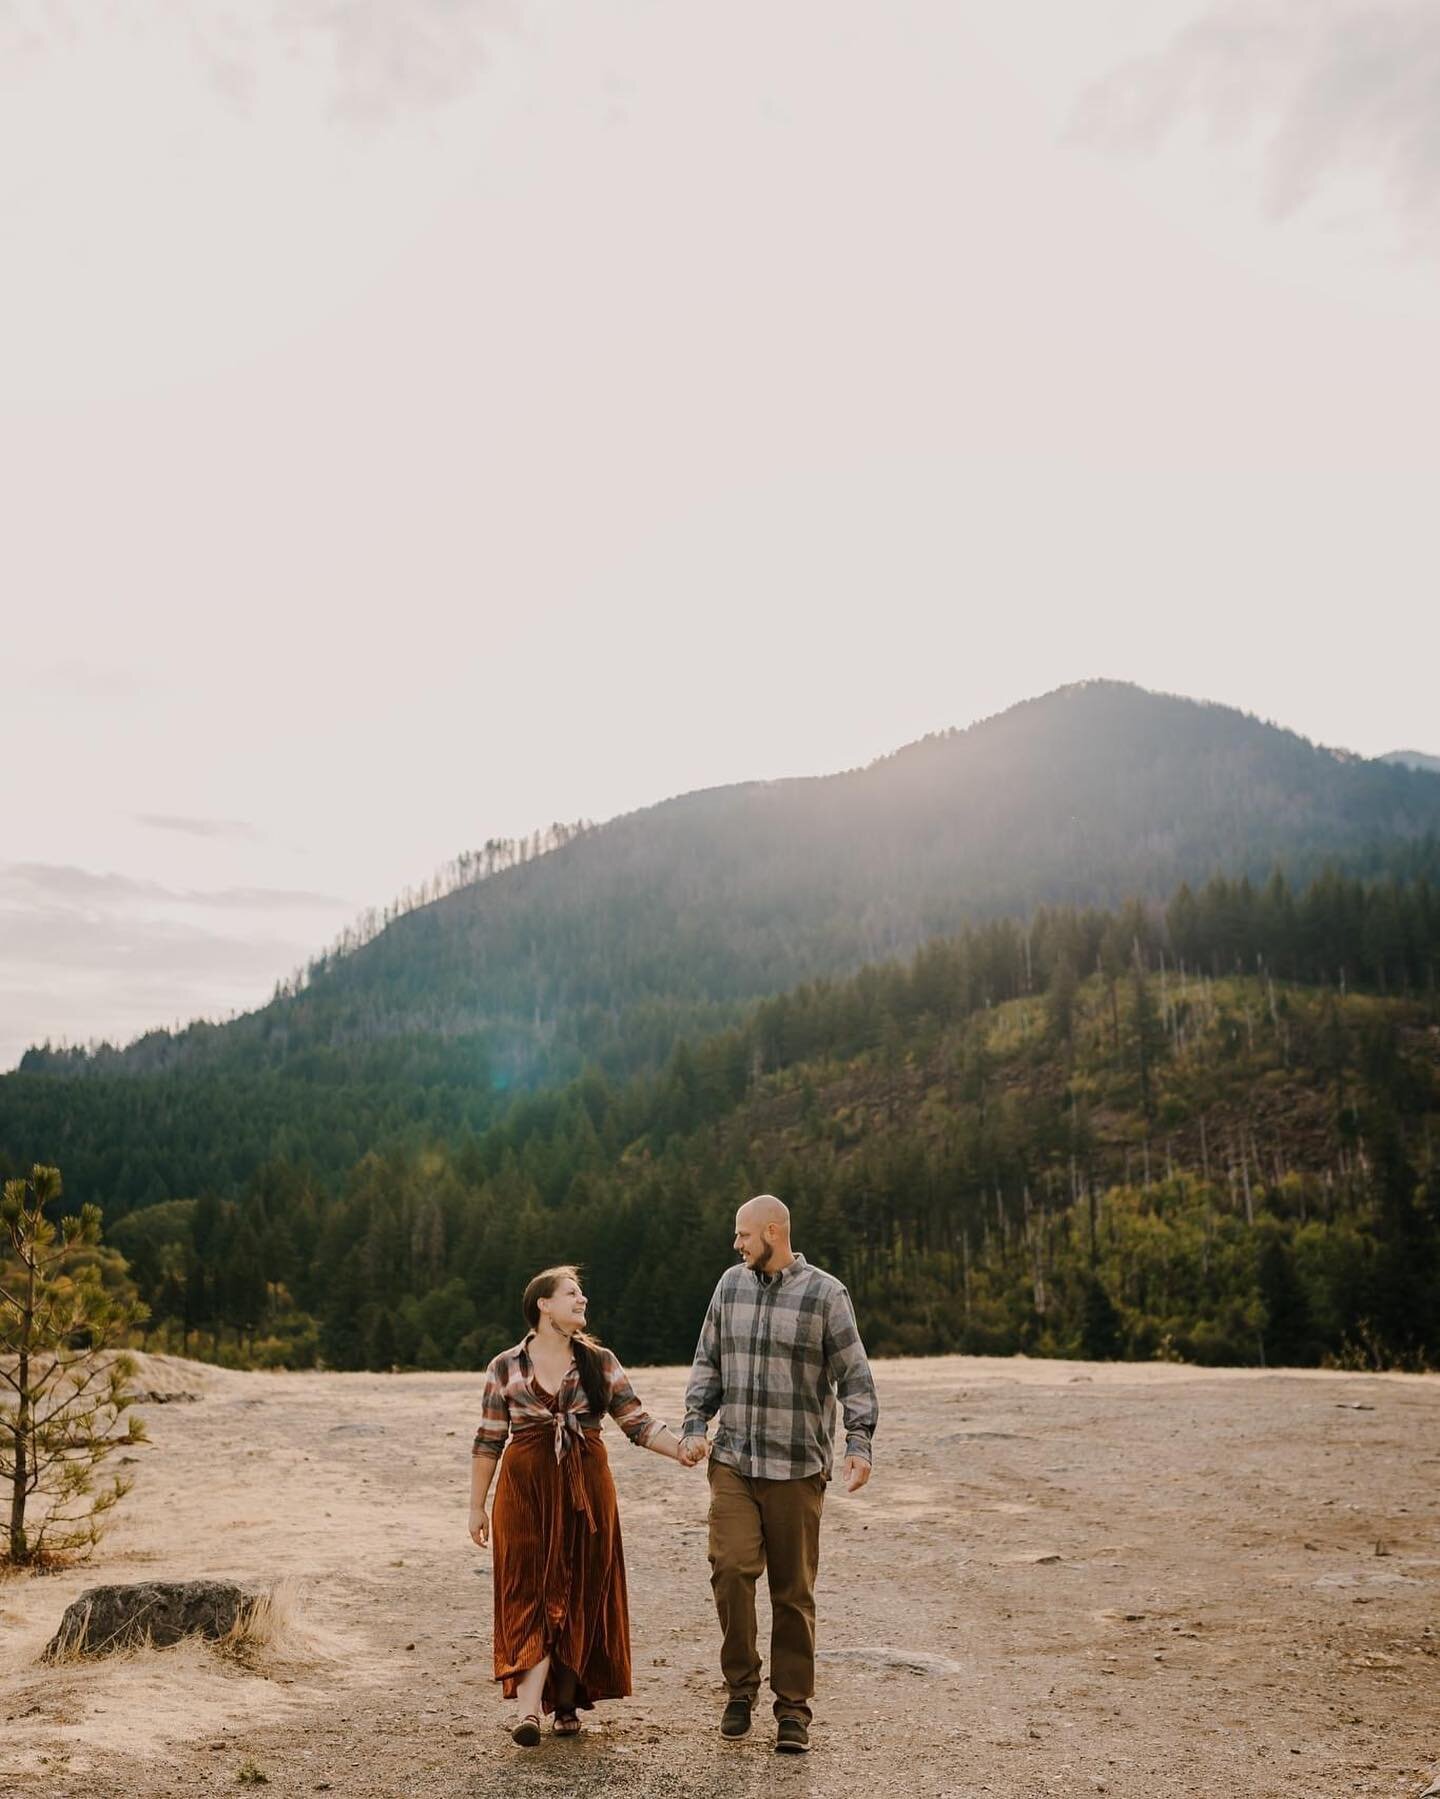 I am absolutely thrilled to share a sneak peek from the engagement session of a couple very dear to my heart, Nicole and Cole.
Not only is Nicole a talented photographer, but she's also become one of my friends. We've shared photography adventures, a